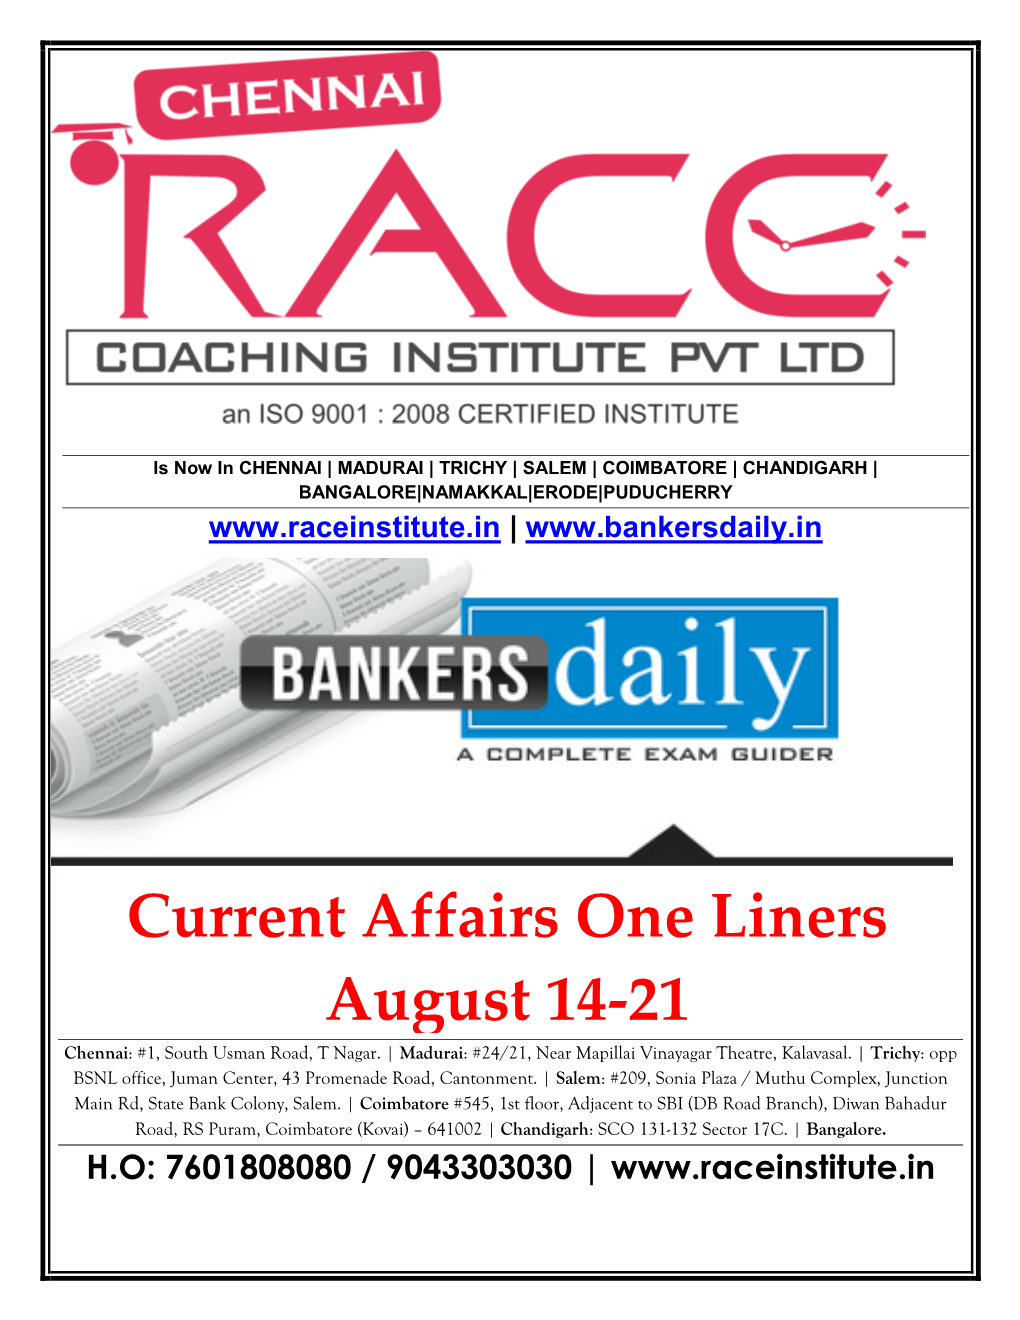 Current Affairs One Liners August 14-21